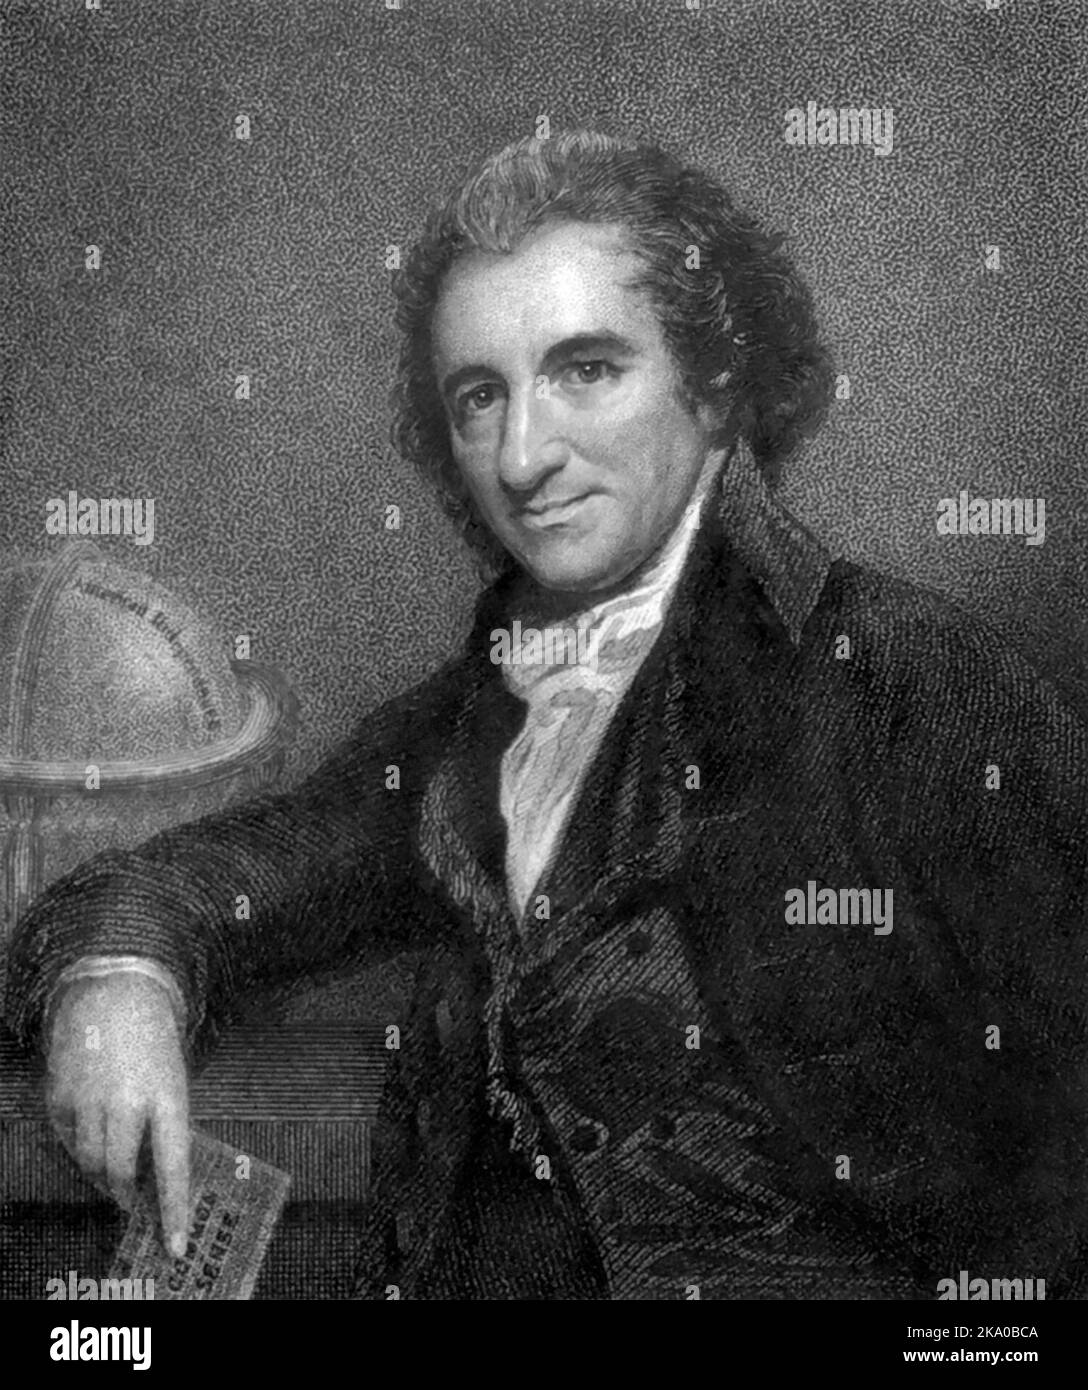 Thomas Paine (1737-1809), English-born American political activist, philosopher, political theorist, and revolutionary who authored Common Sense (1776) and The American Crisis (1776–1783), two of the most influential pamphlets at the start of the American Revolution, Stock Photo